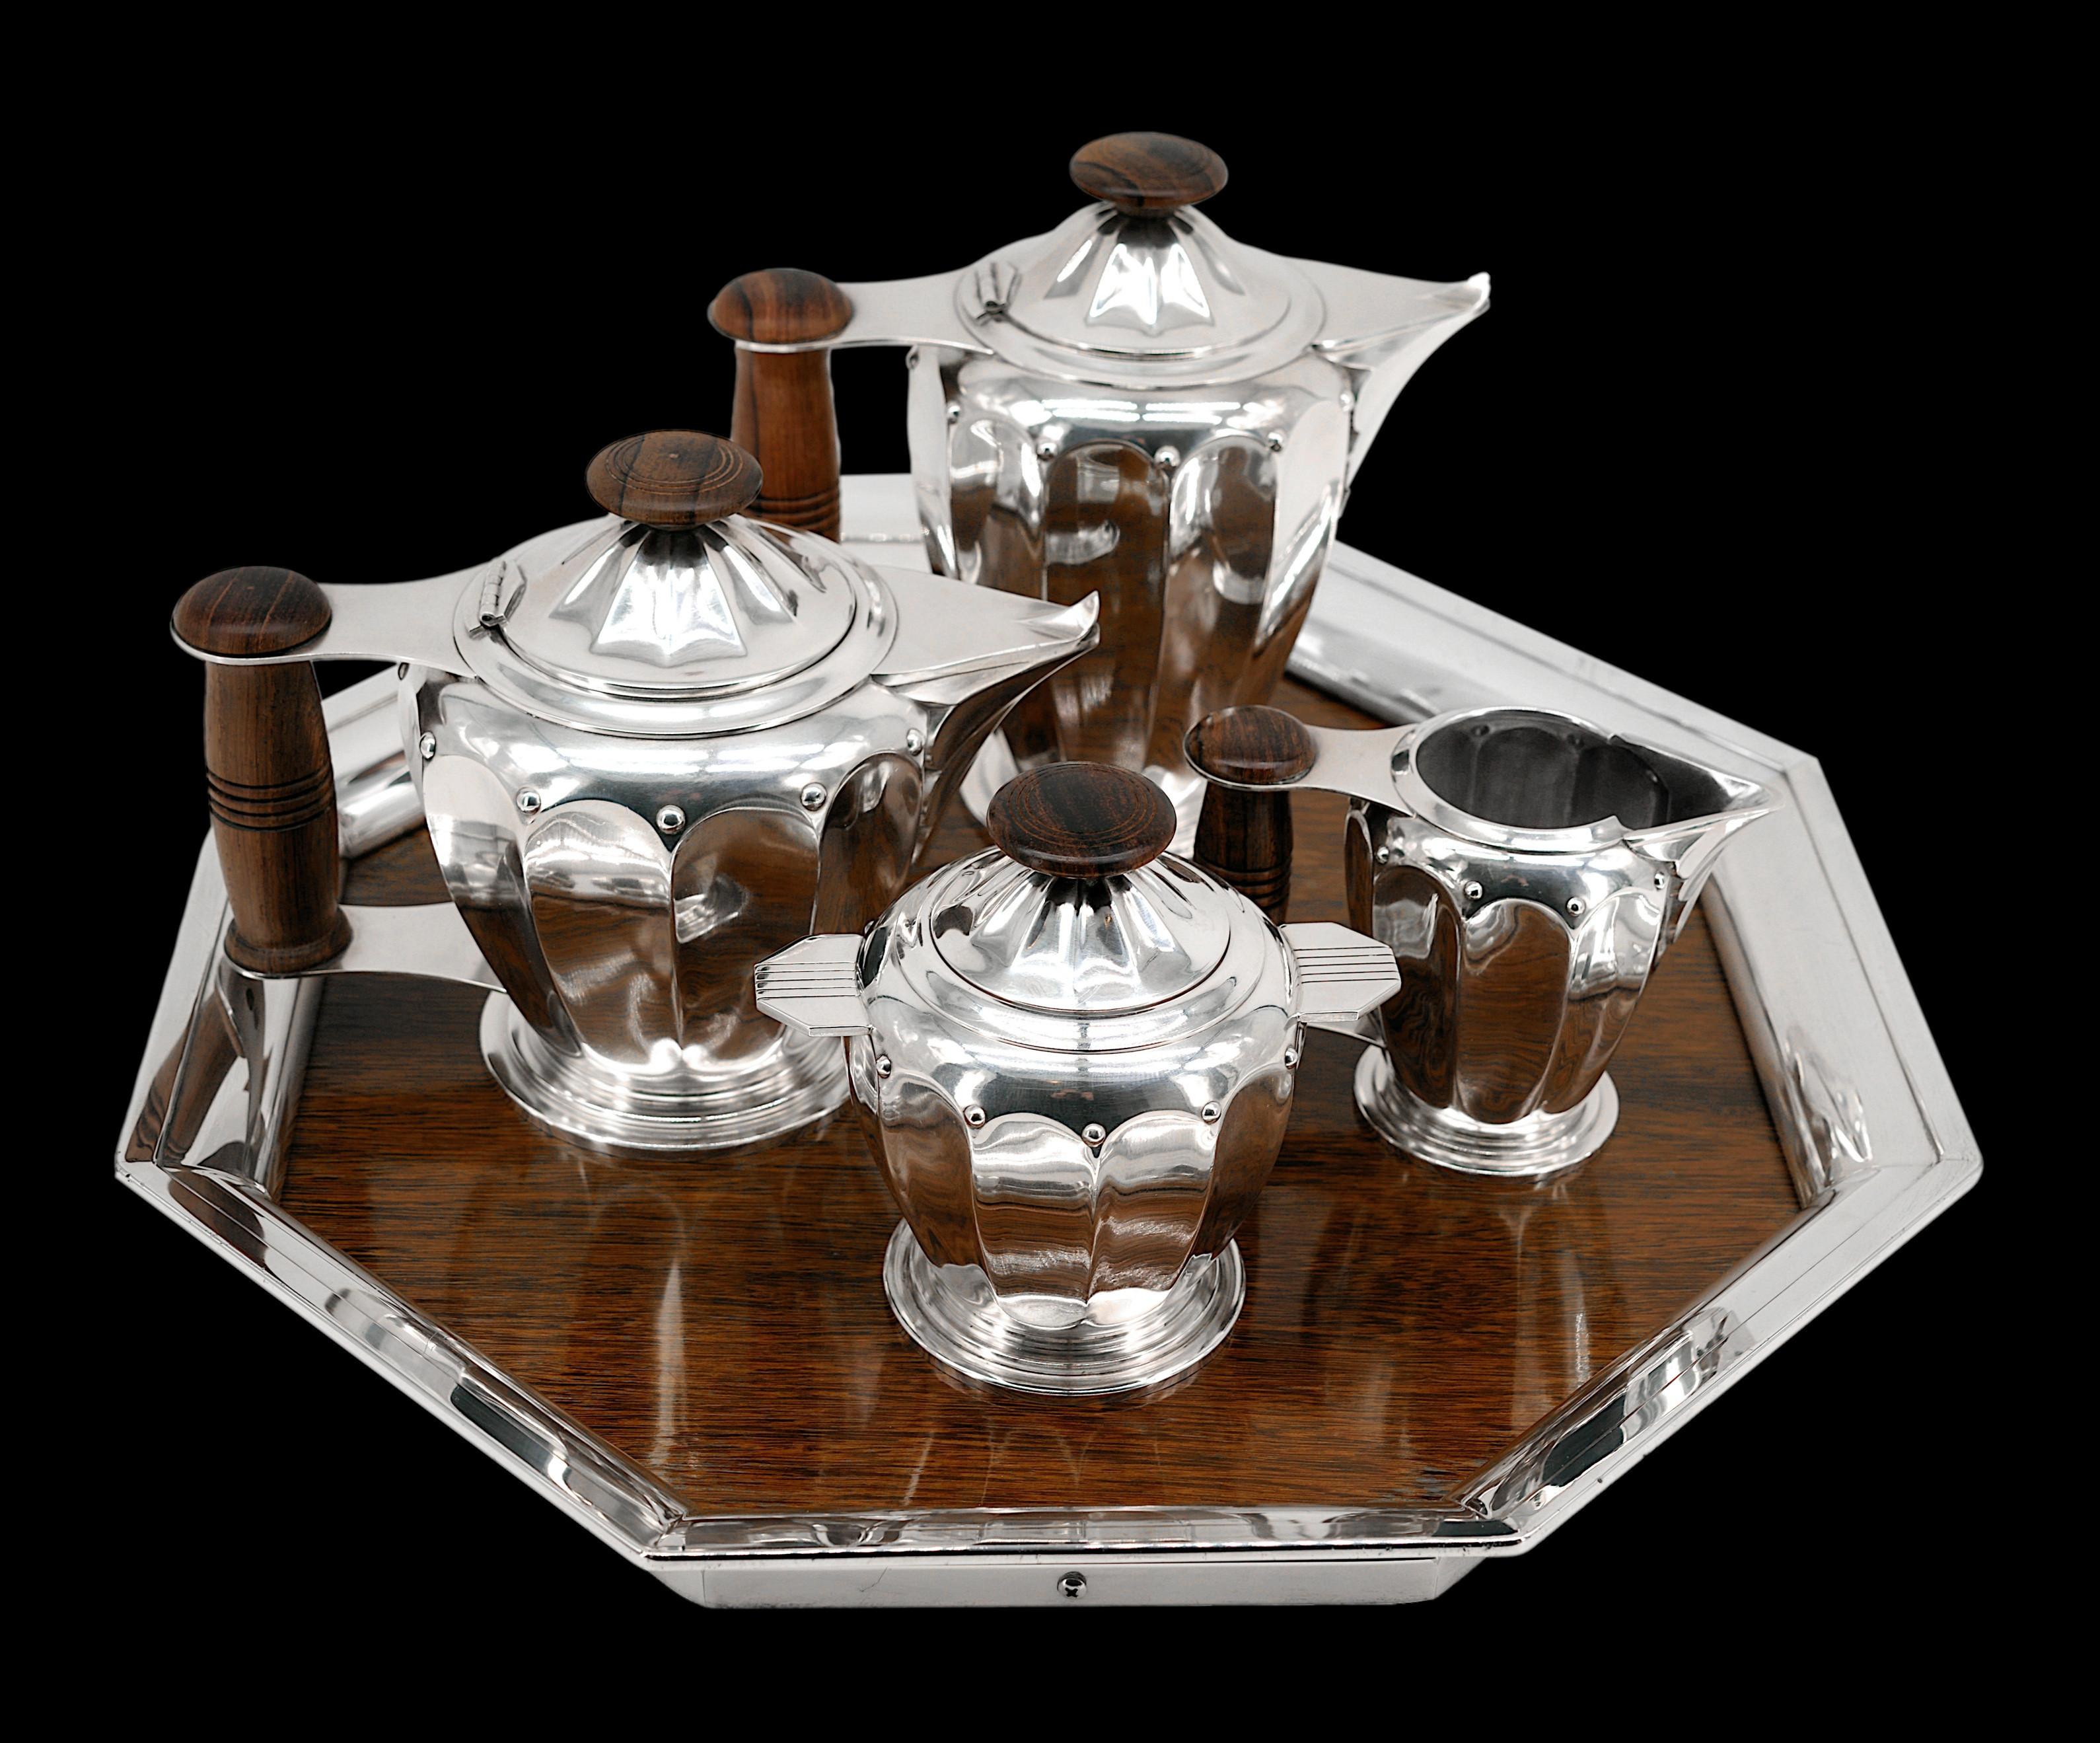 Roux-Marquiand French Art Deco Tea-Coffee Set, 1925 For Sale 7